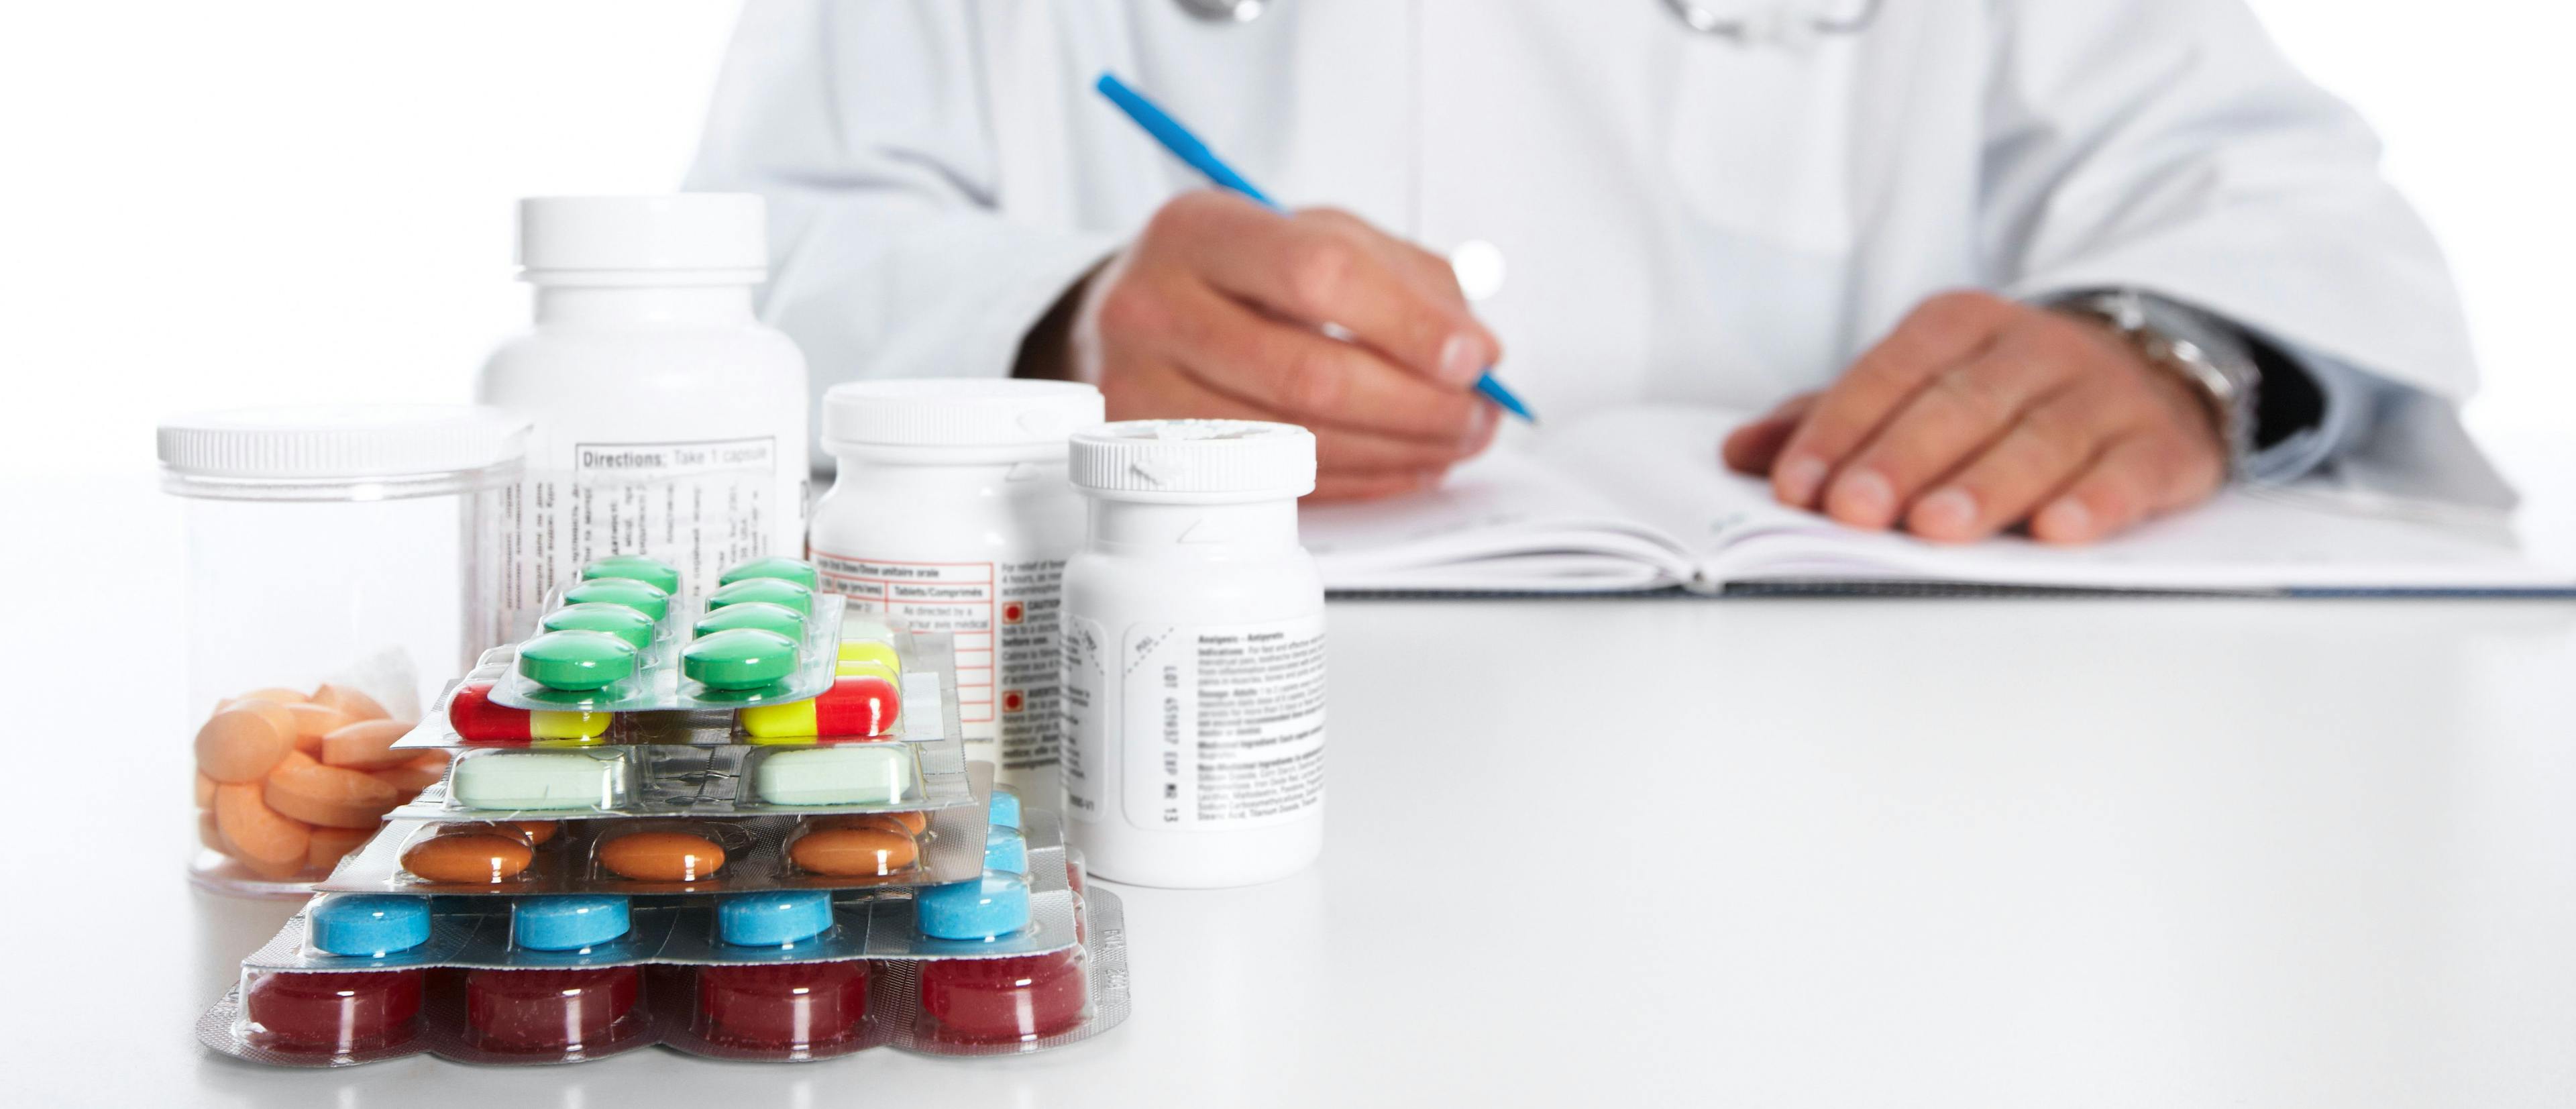 How Do Generic Drug Appearances Affect Patient Adherence?